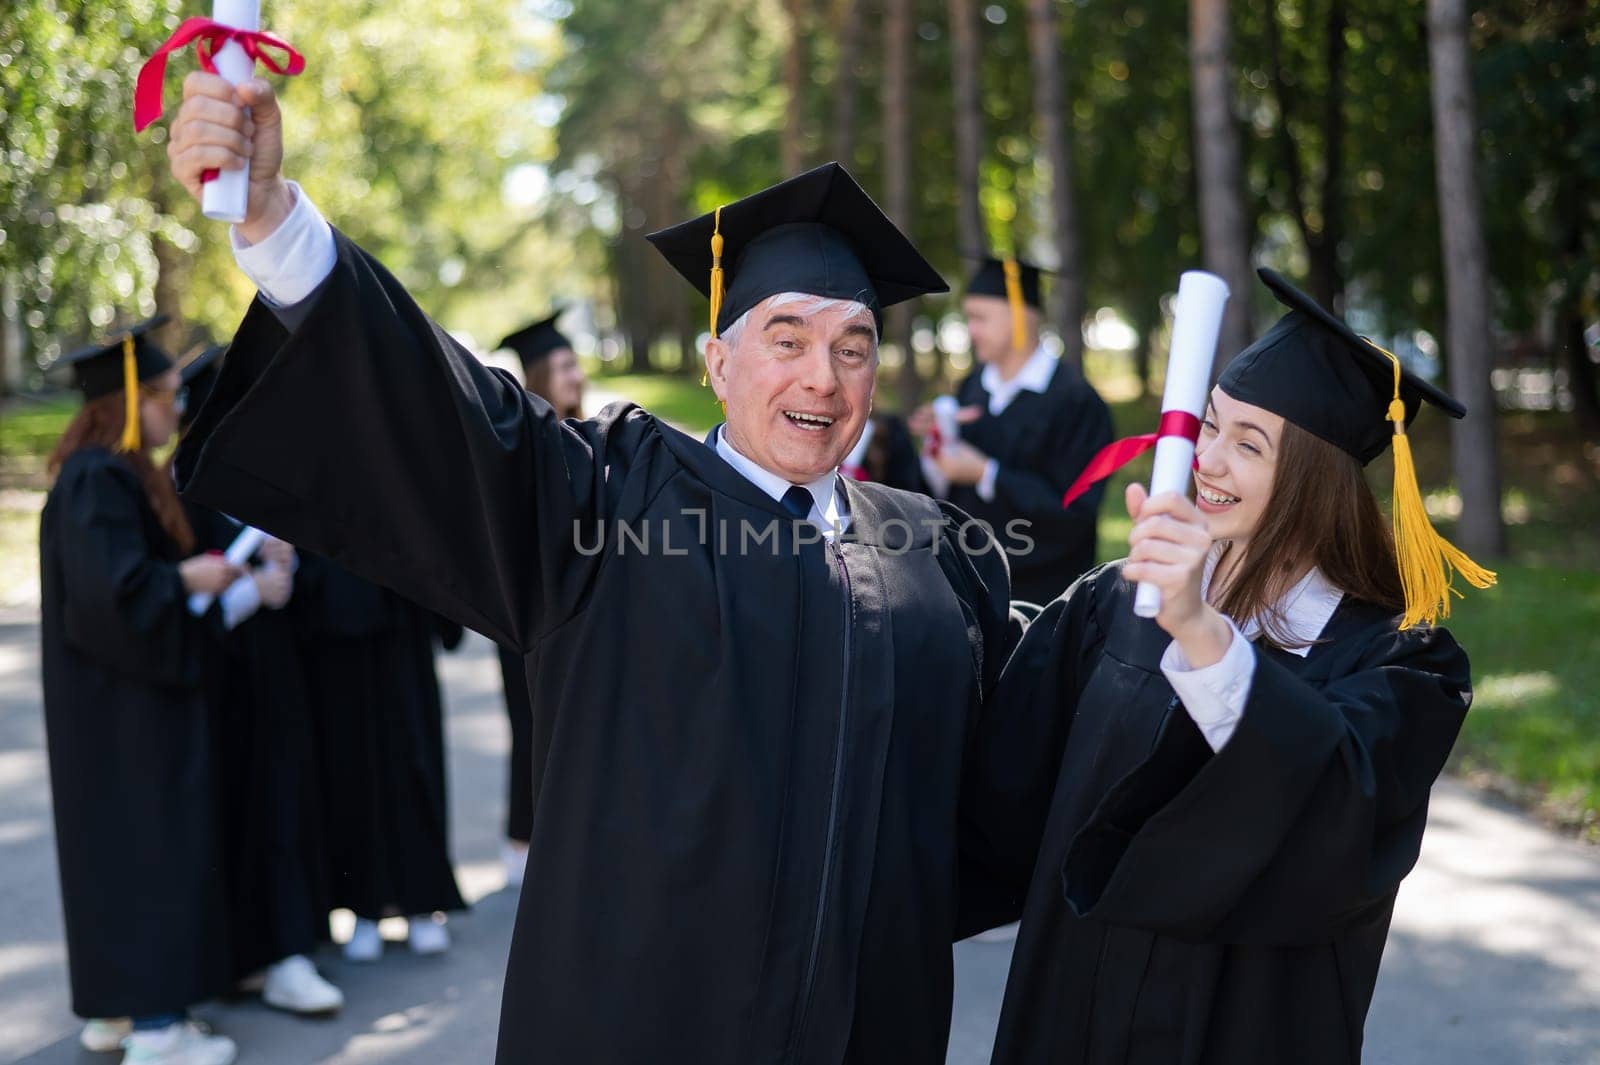 A group of graduates in robes outdoors. An elderly man and a young woman congratulate each other on their graduation